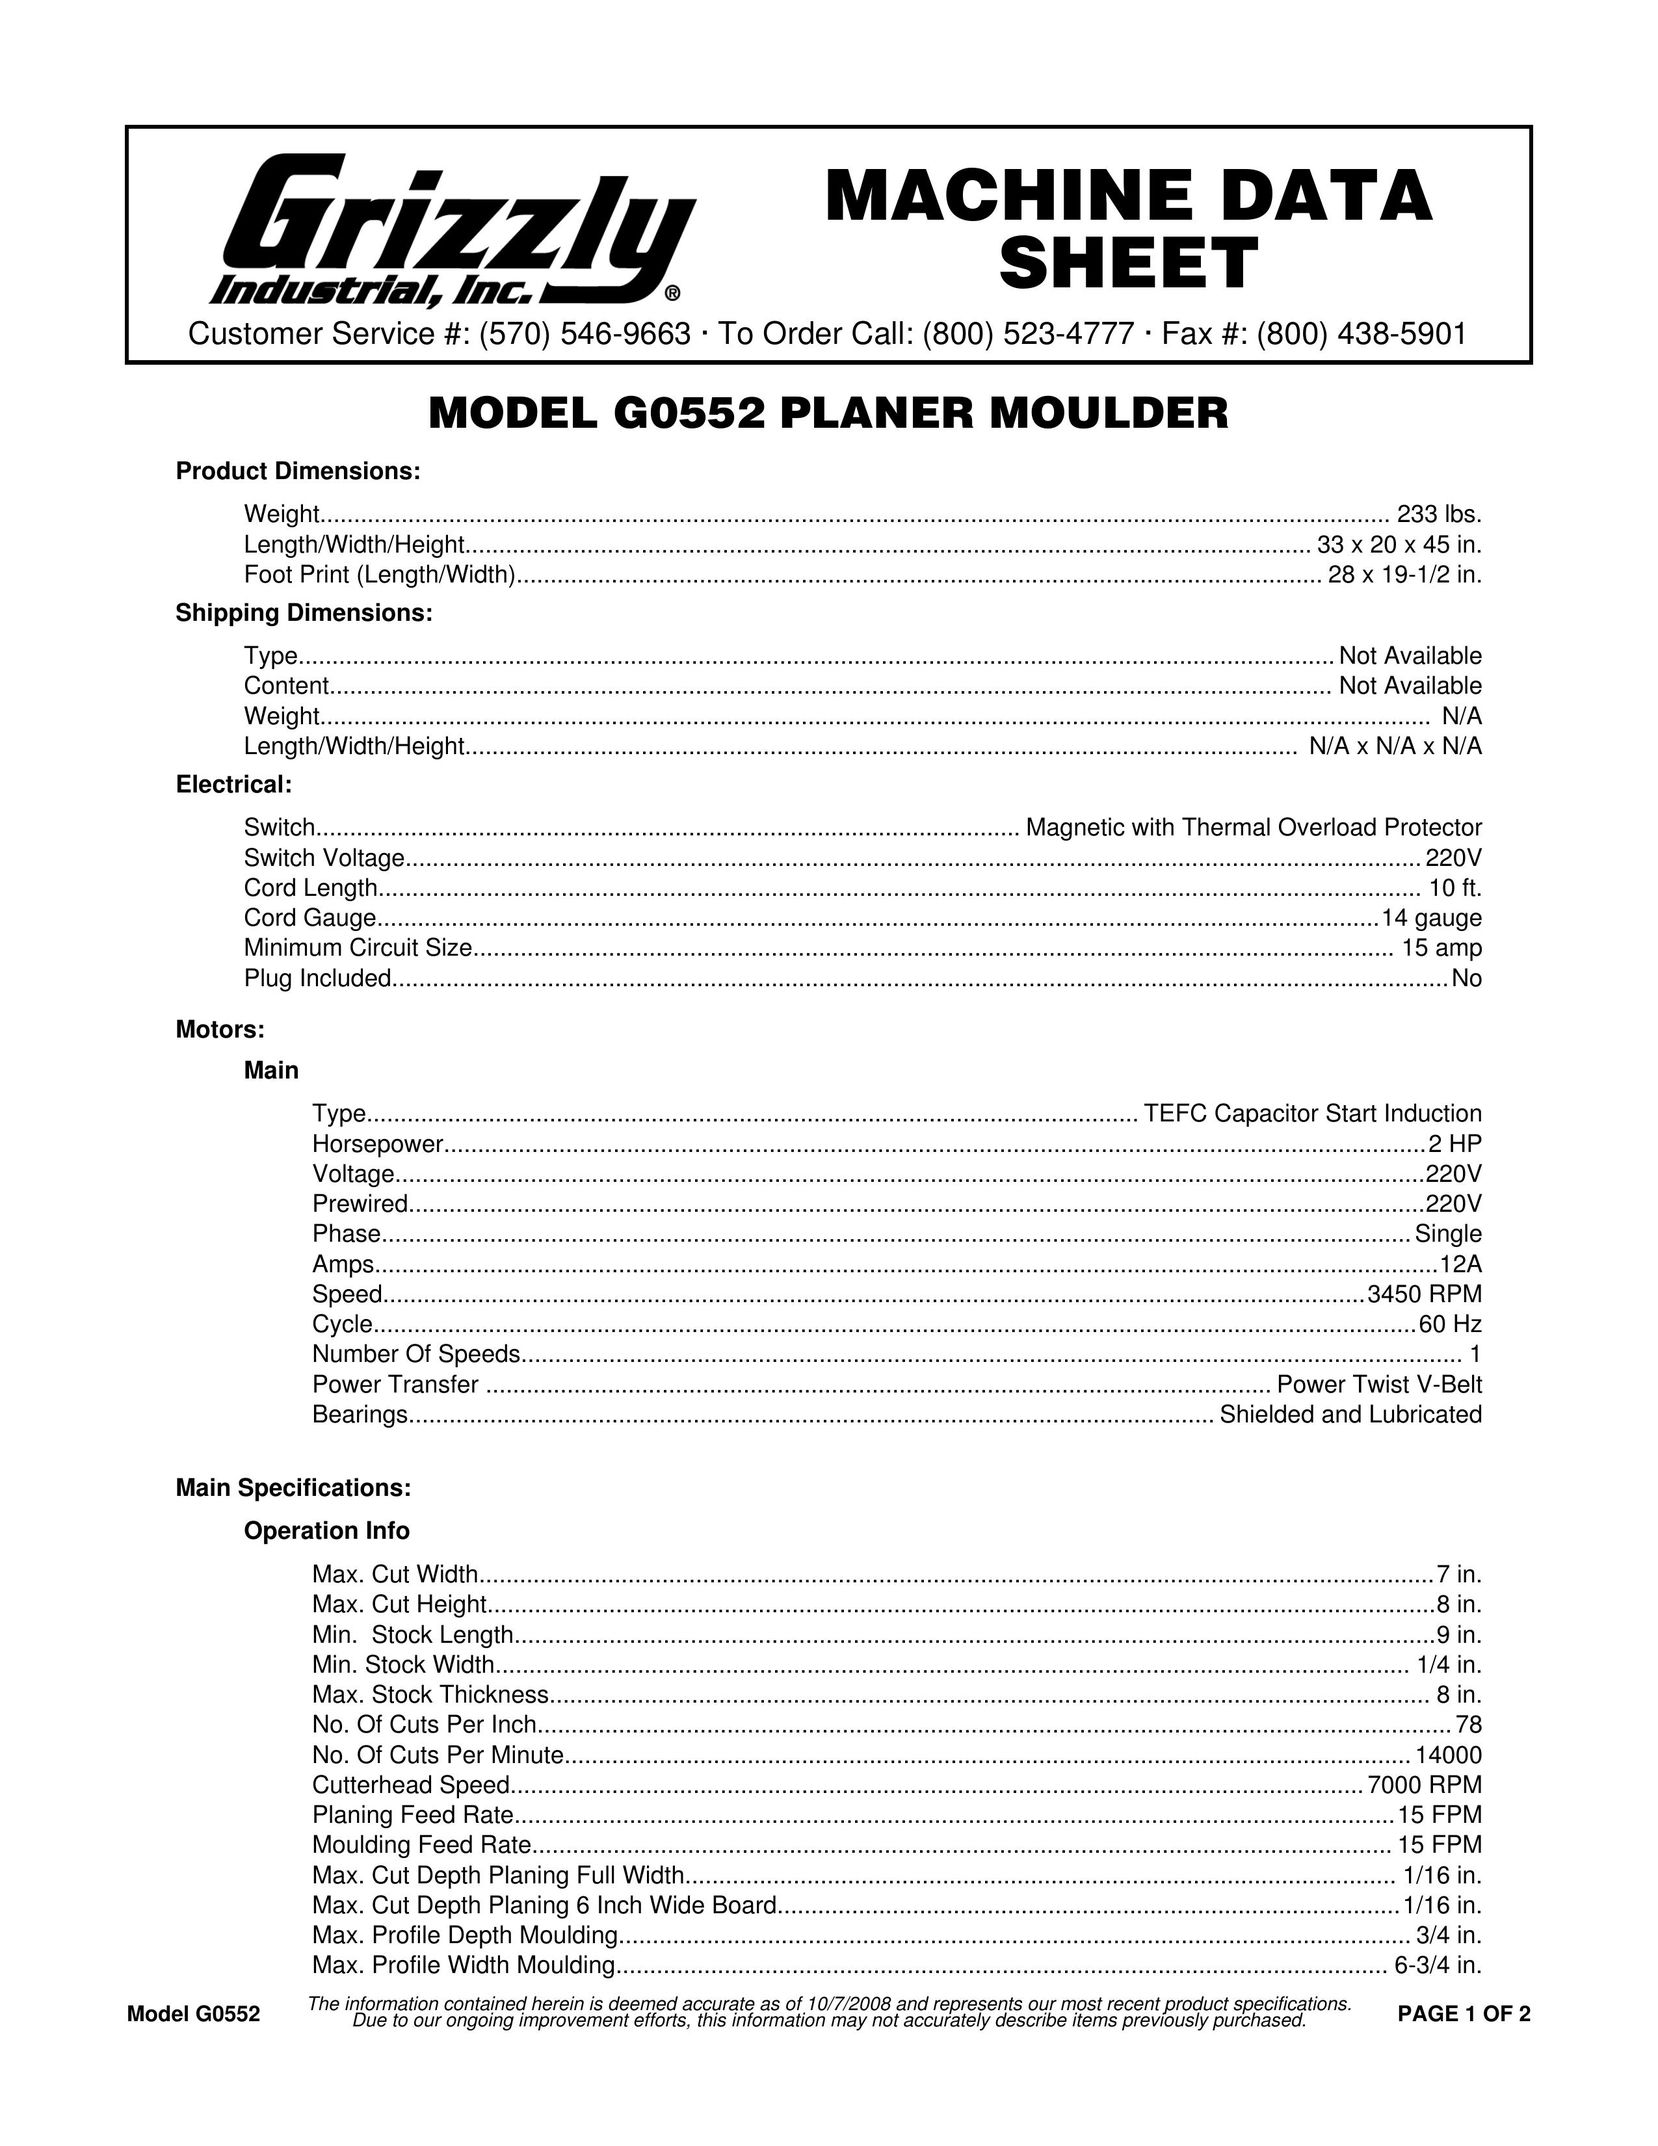 Grizzly G0552 Planer User Manual